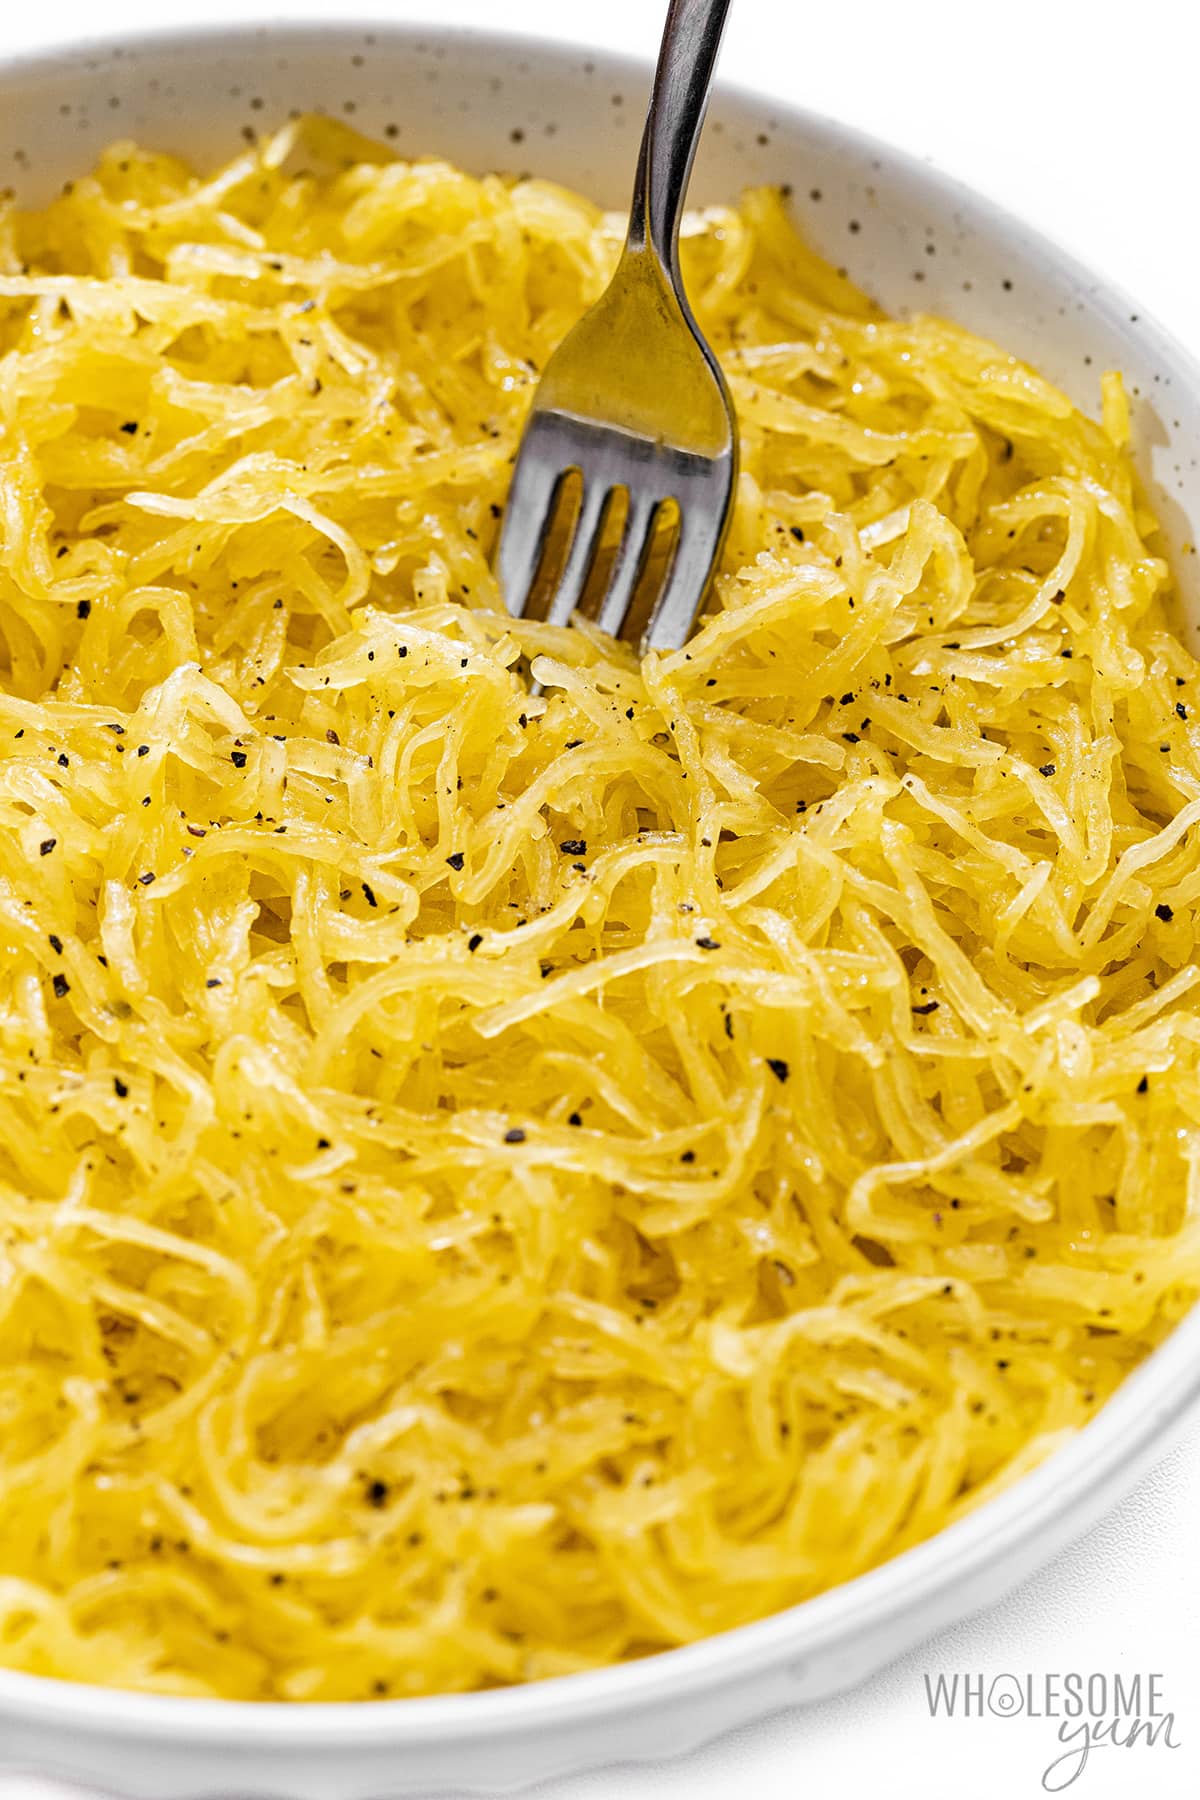 After cooking the spaghetti squash in the microwave, place the noodles in a bowl.